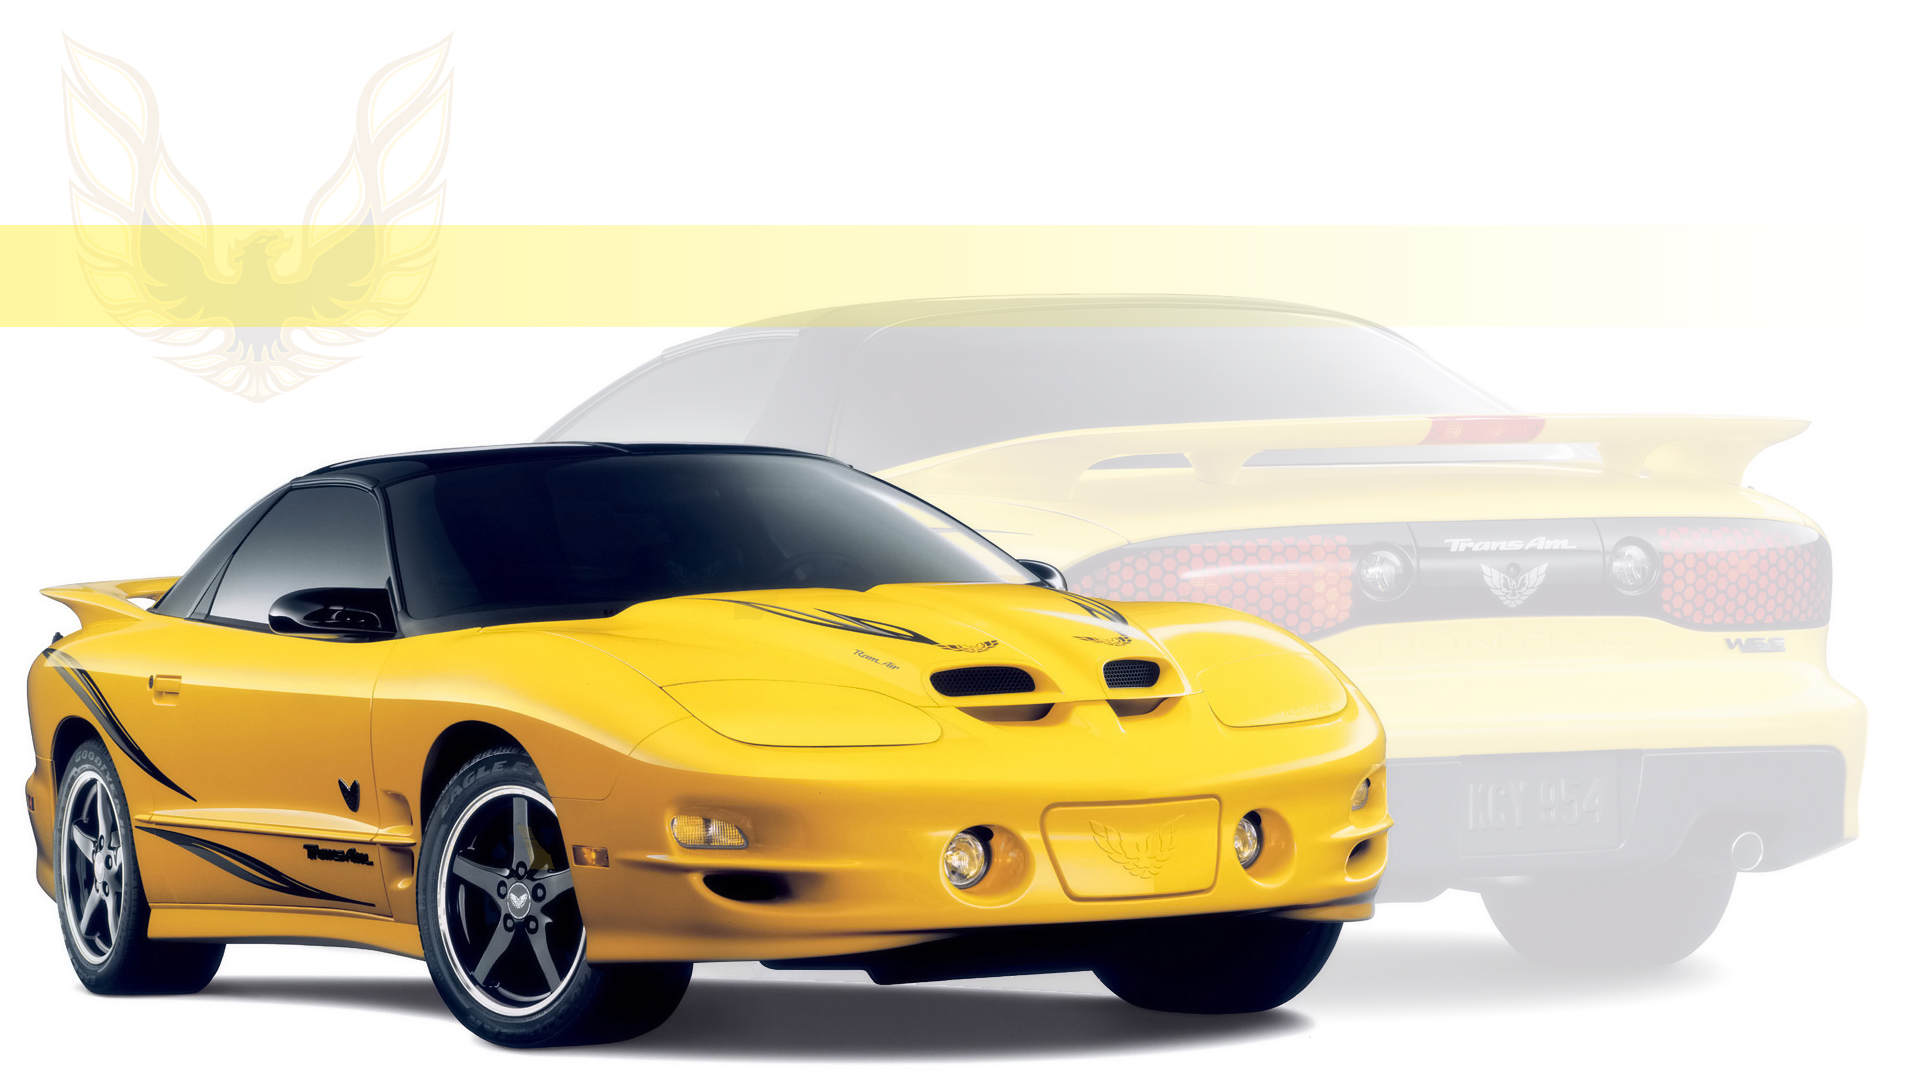 Animated Car Hd Background Wallpaper 18 HD Wallpapers | amagico.